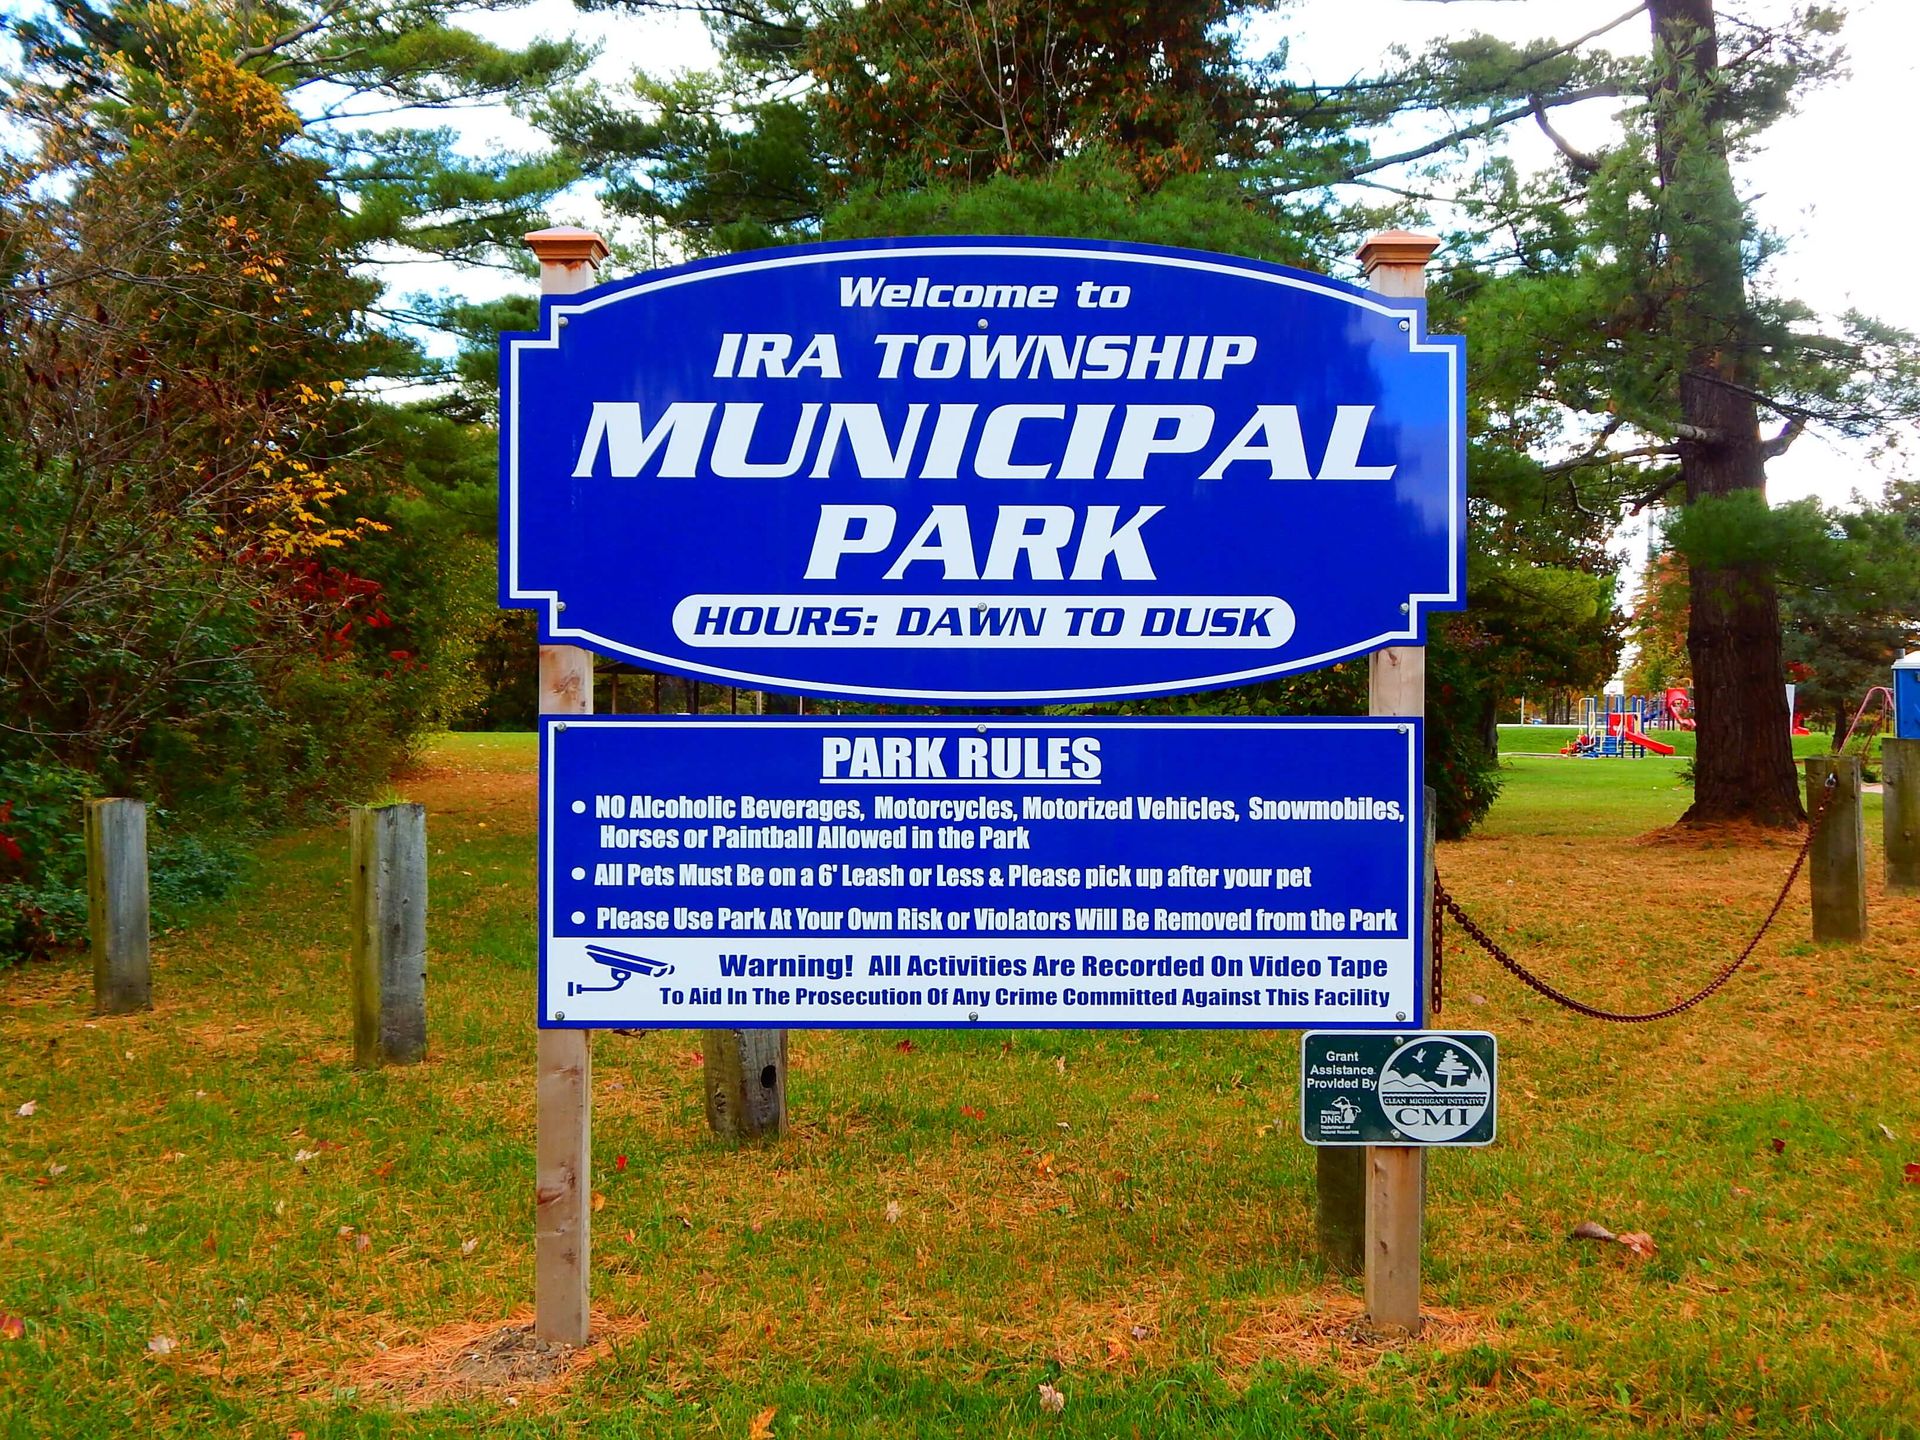 A blue sign says Welcome to Ira Township Municipal Park.